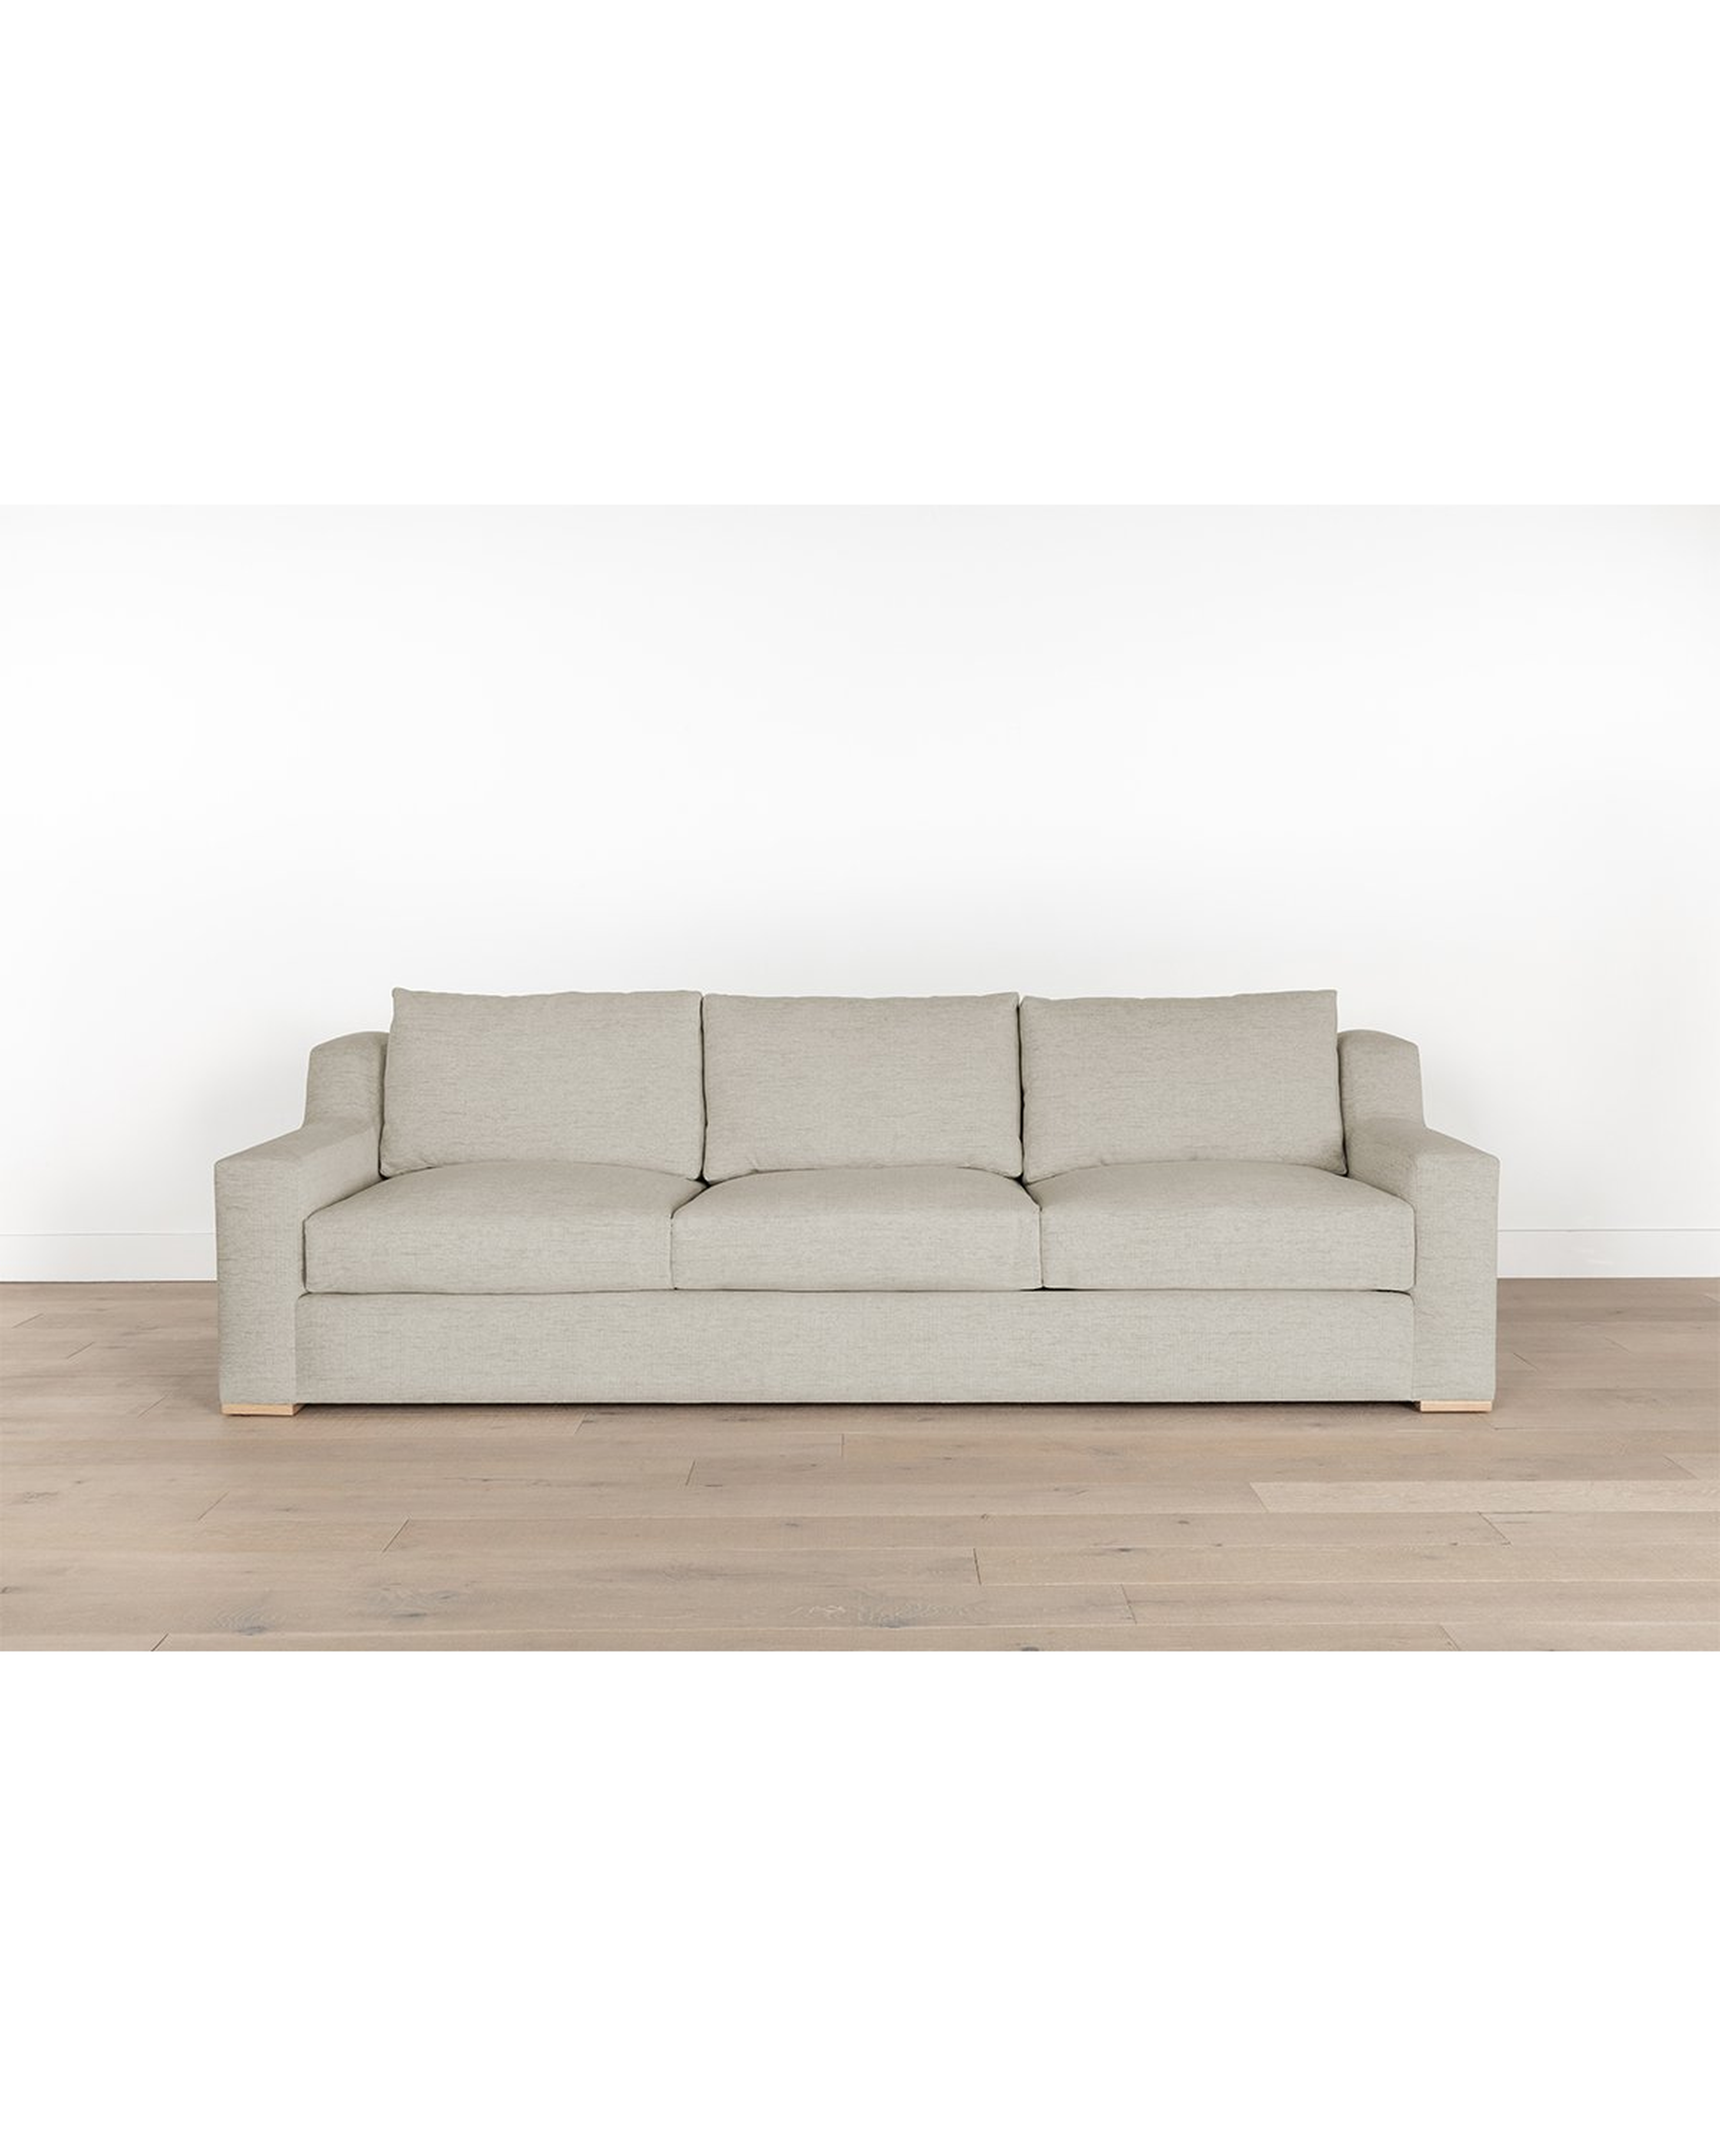 Remi Sofa (ships within 10-14 weeks) - McGee & Co.